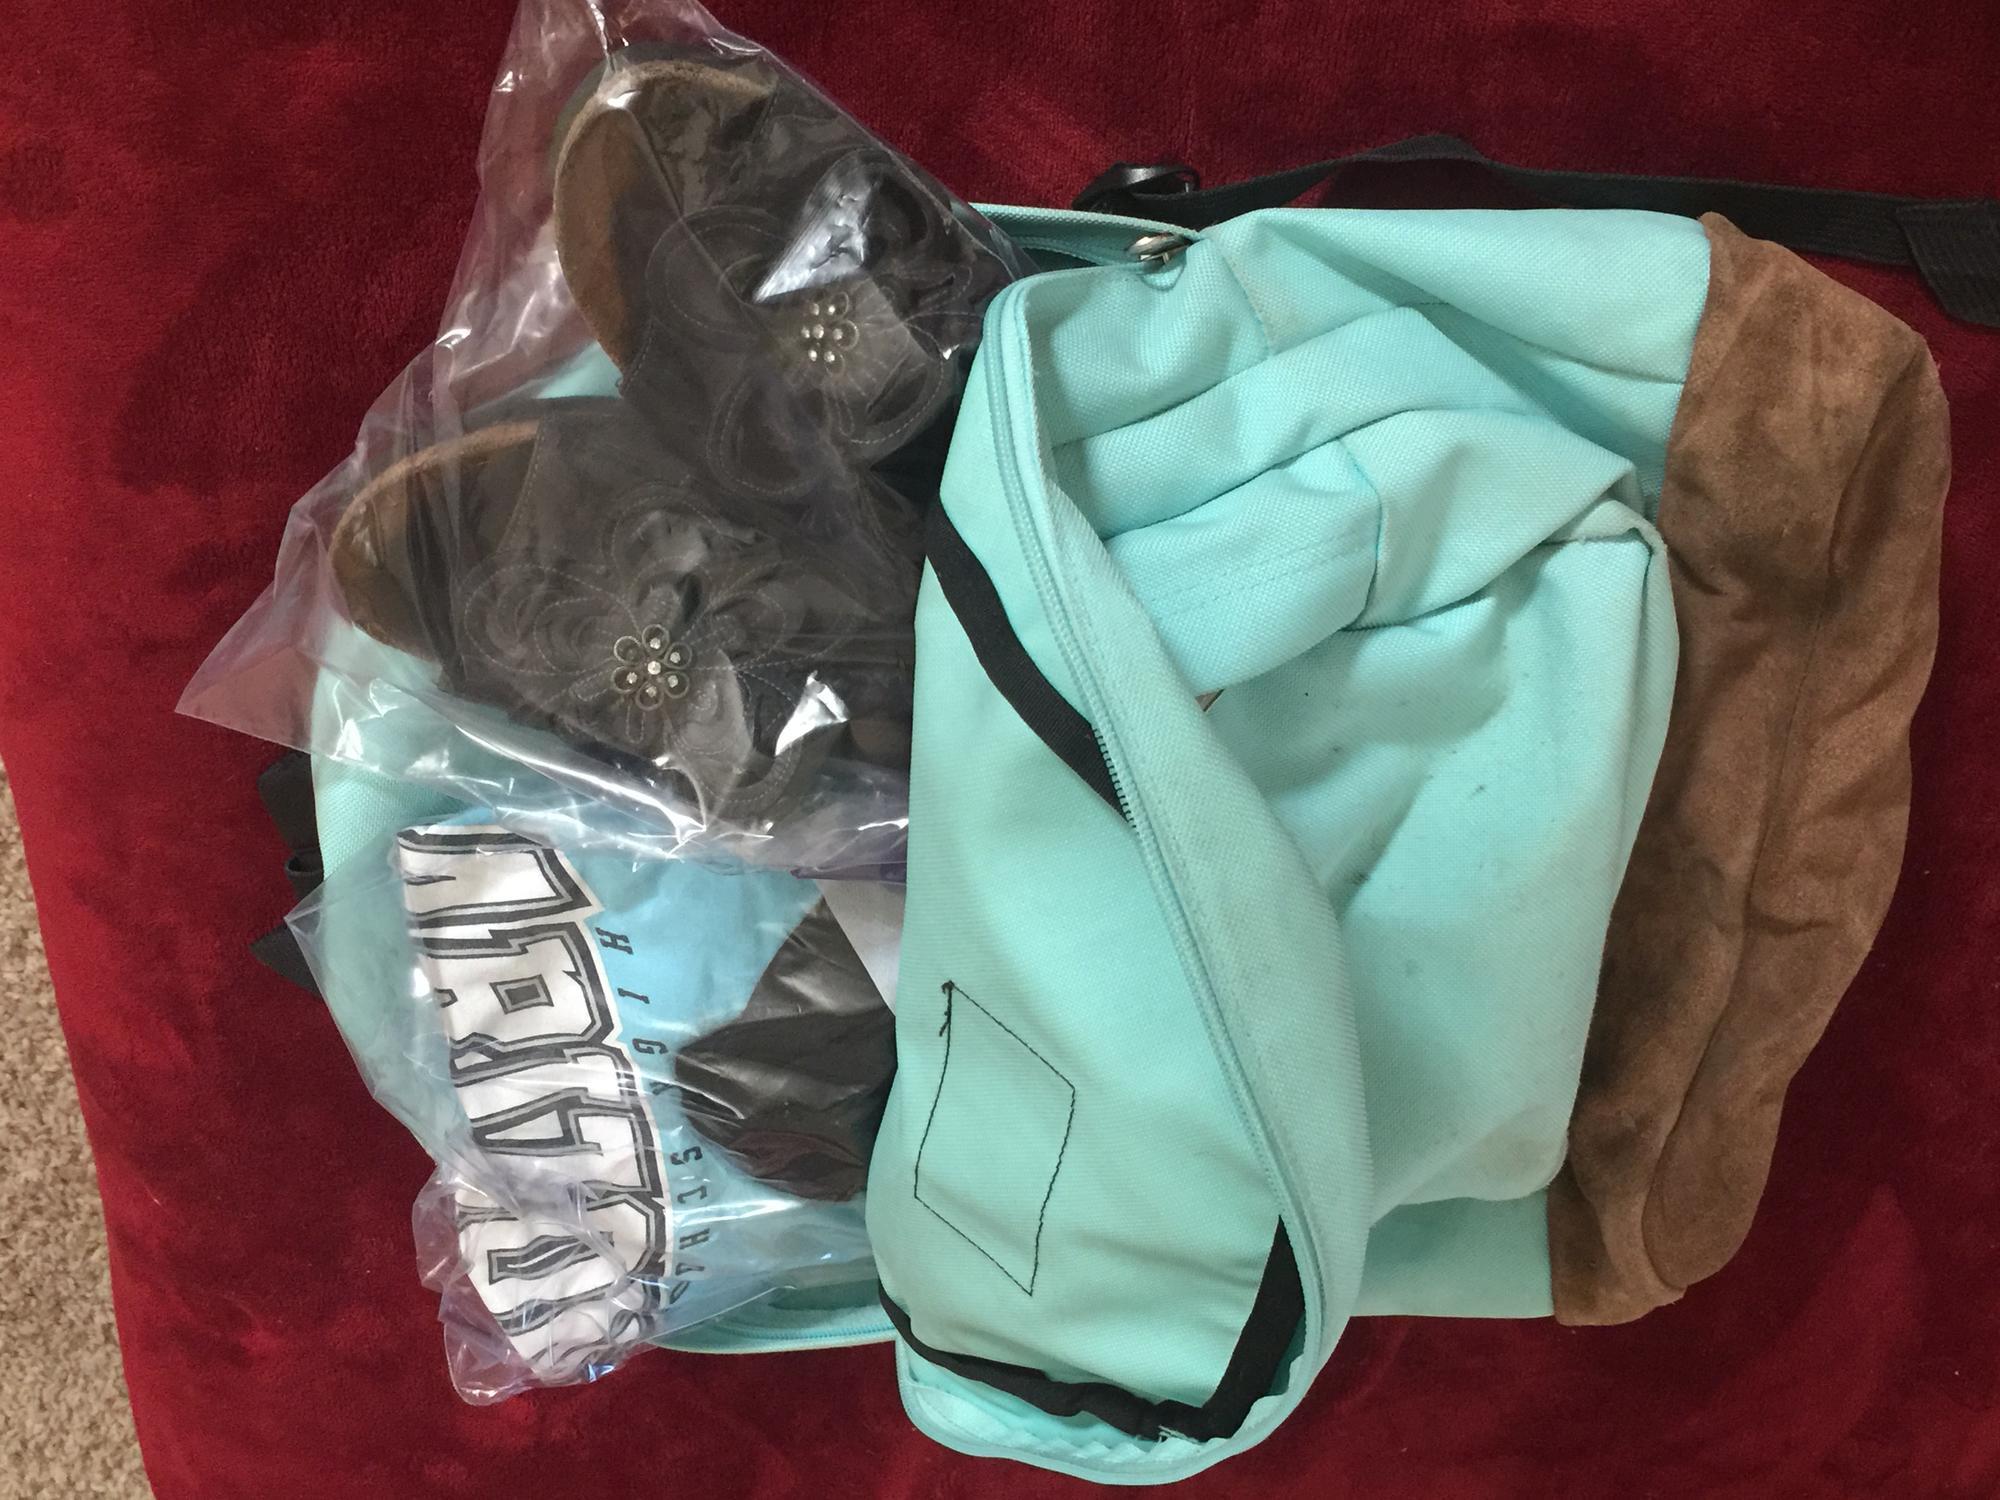 backpack containing items inside plastic bag